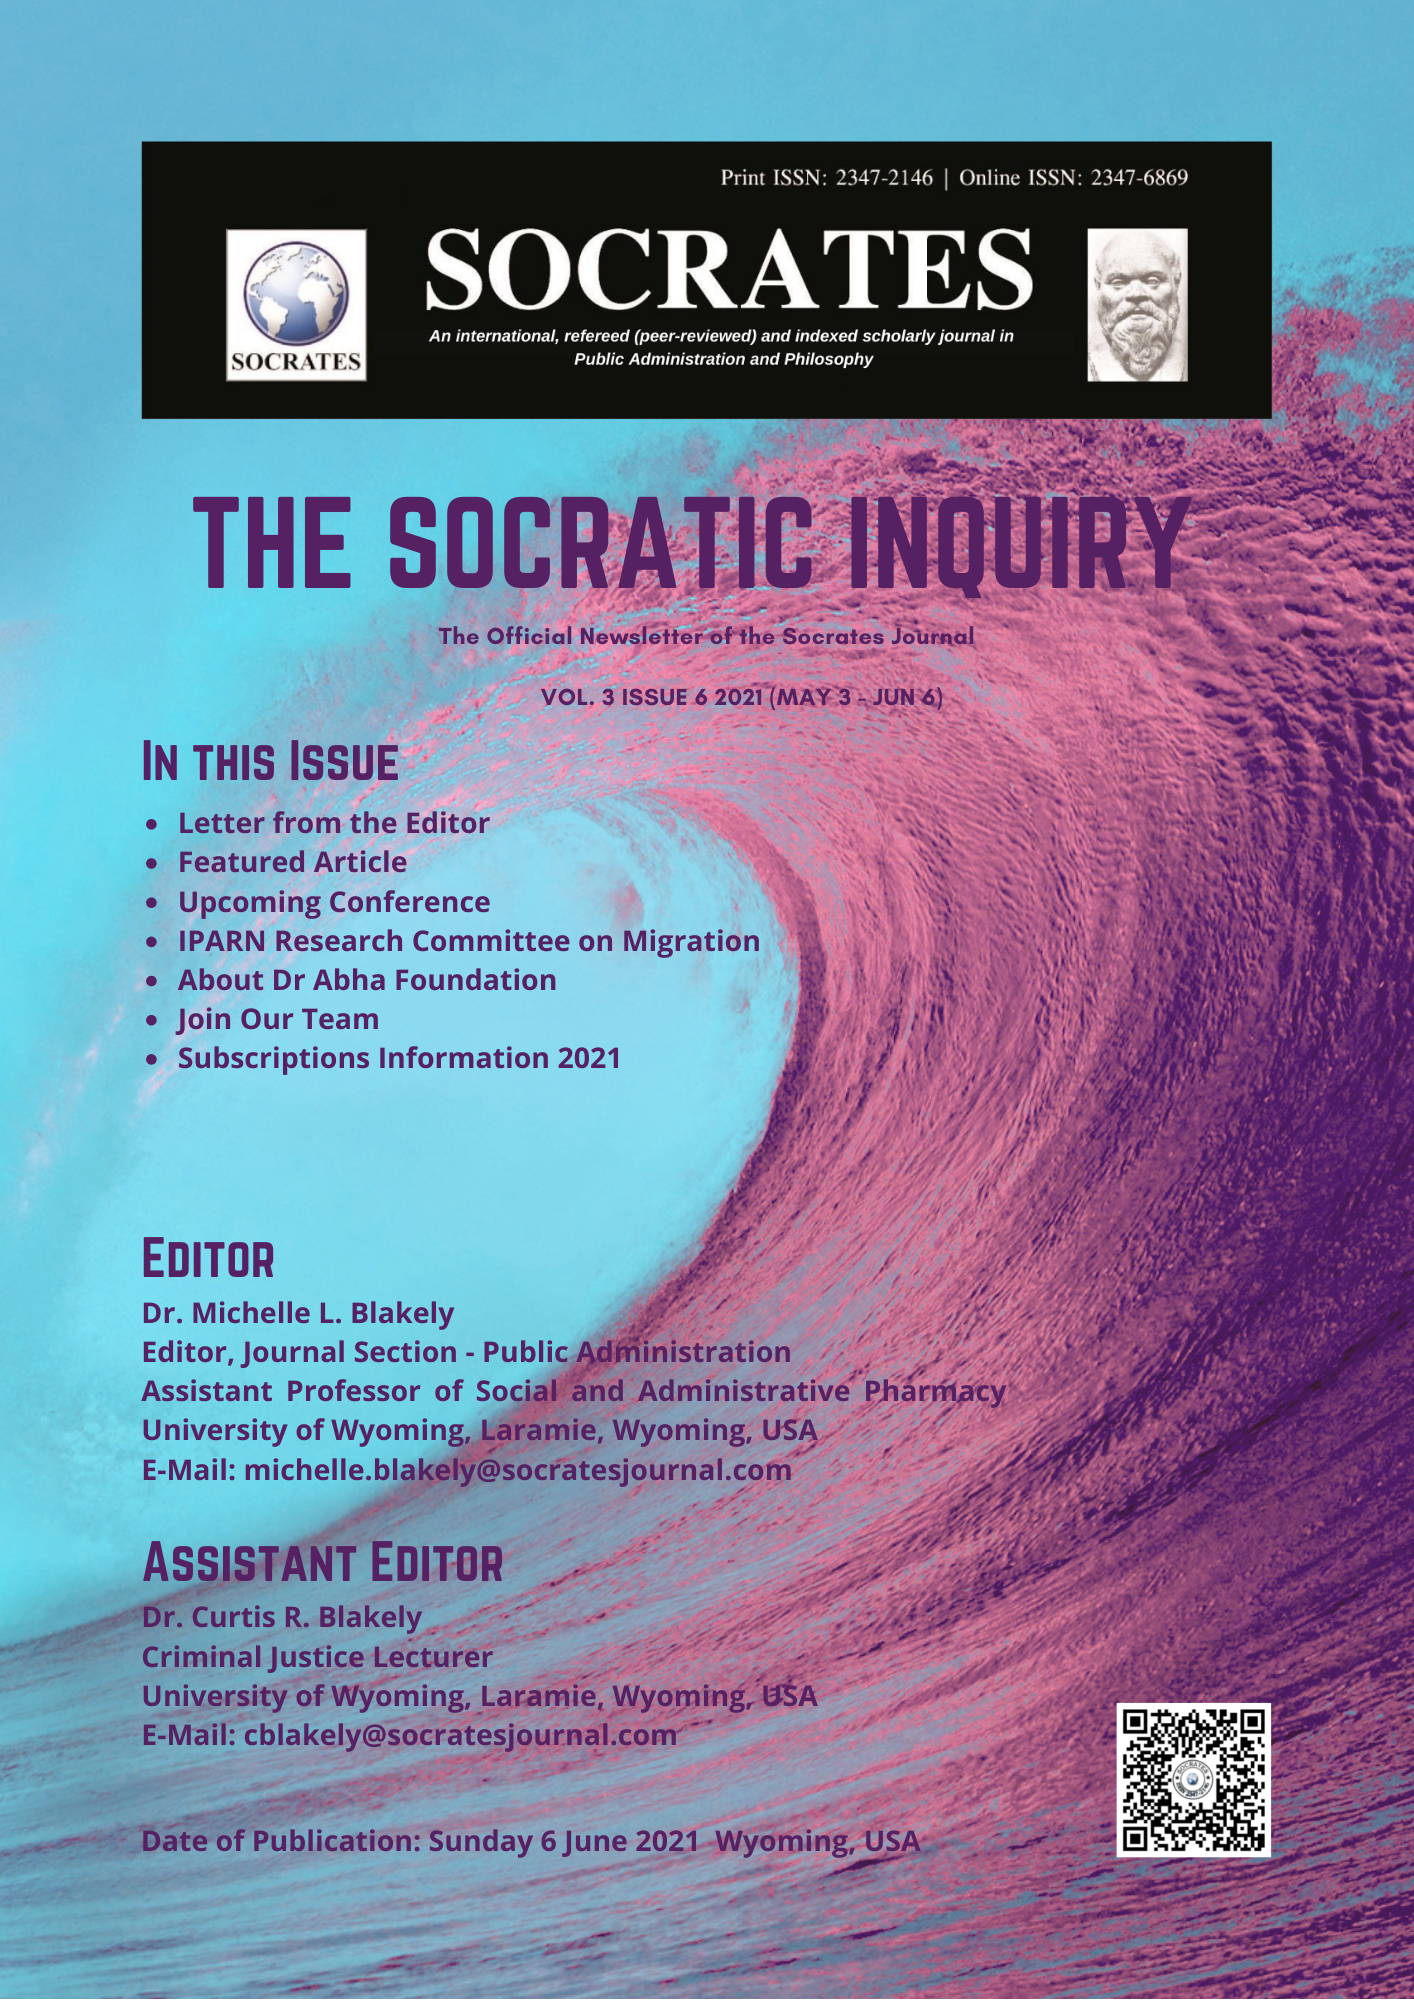 The Socratic Inquiry Newsletter Vol 3 Issue 6 (2021)